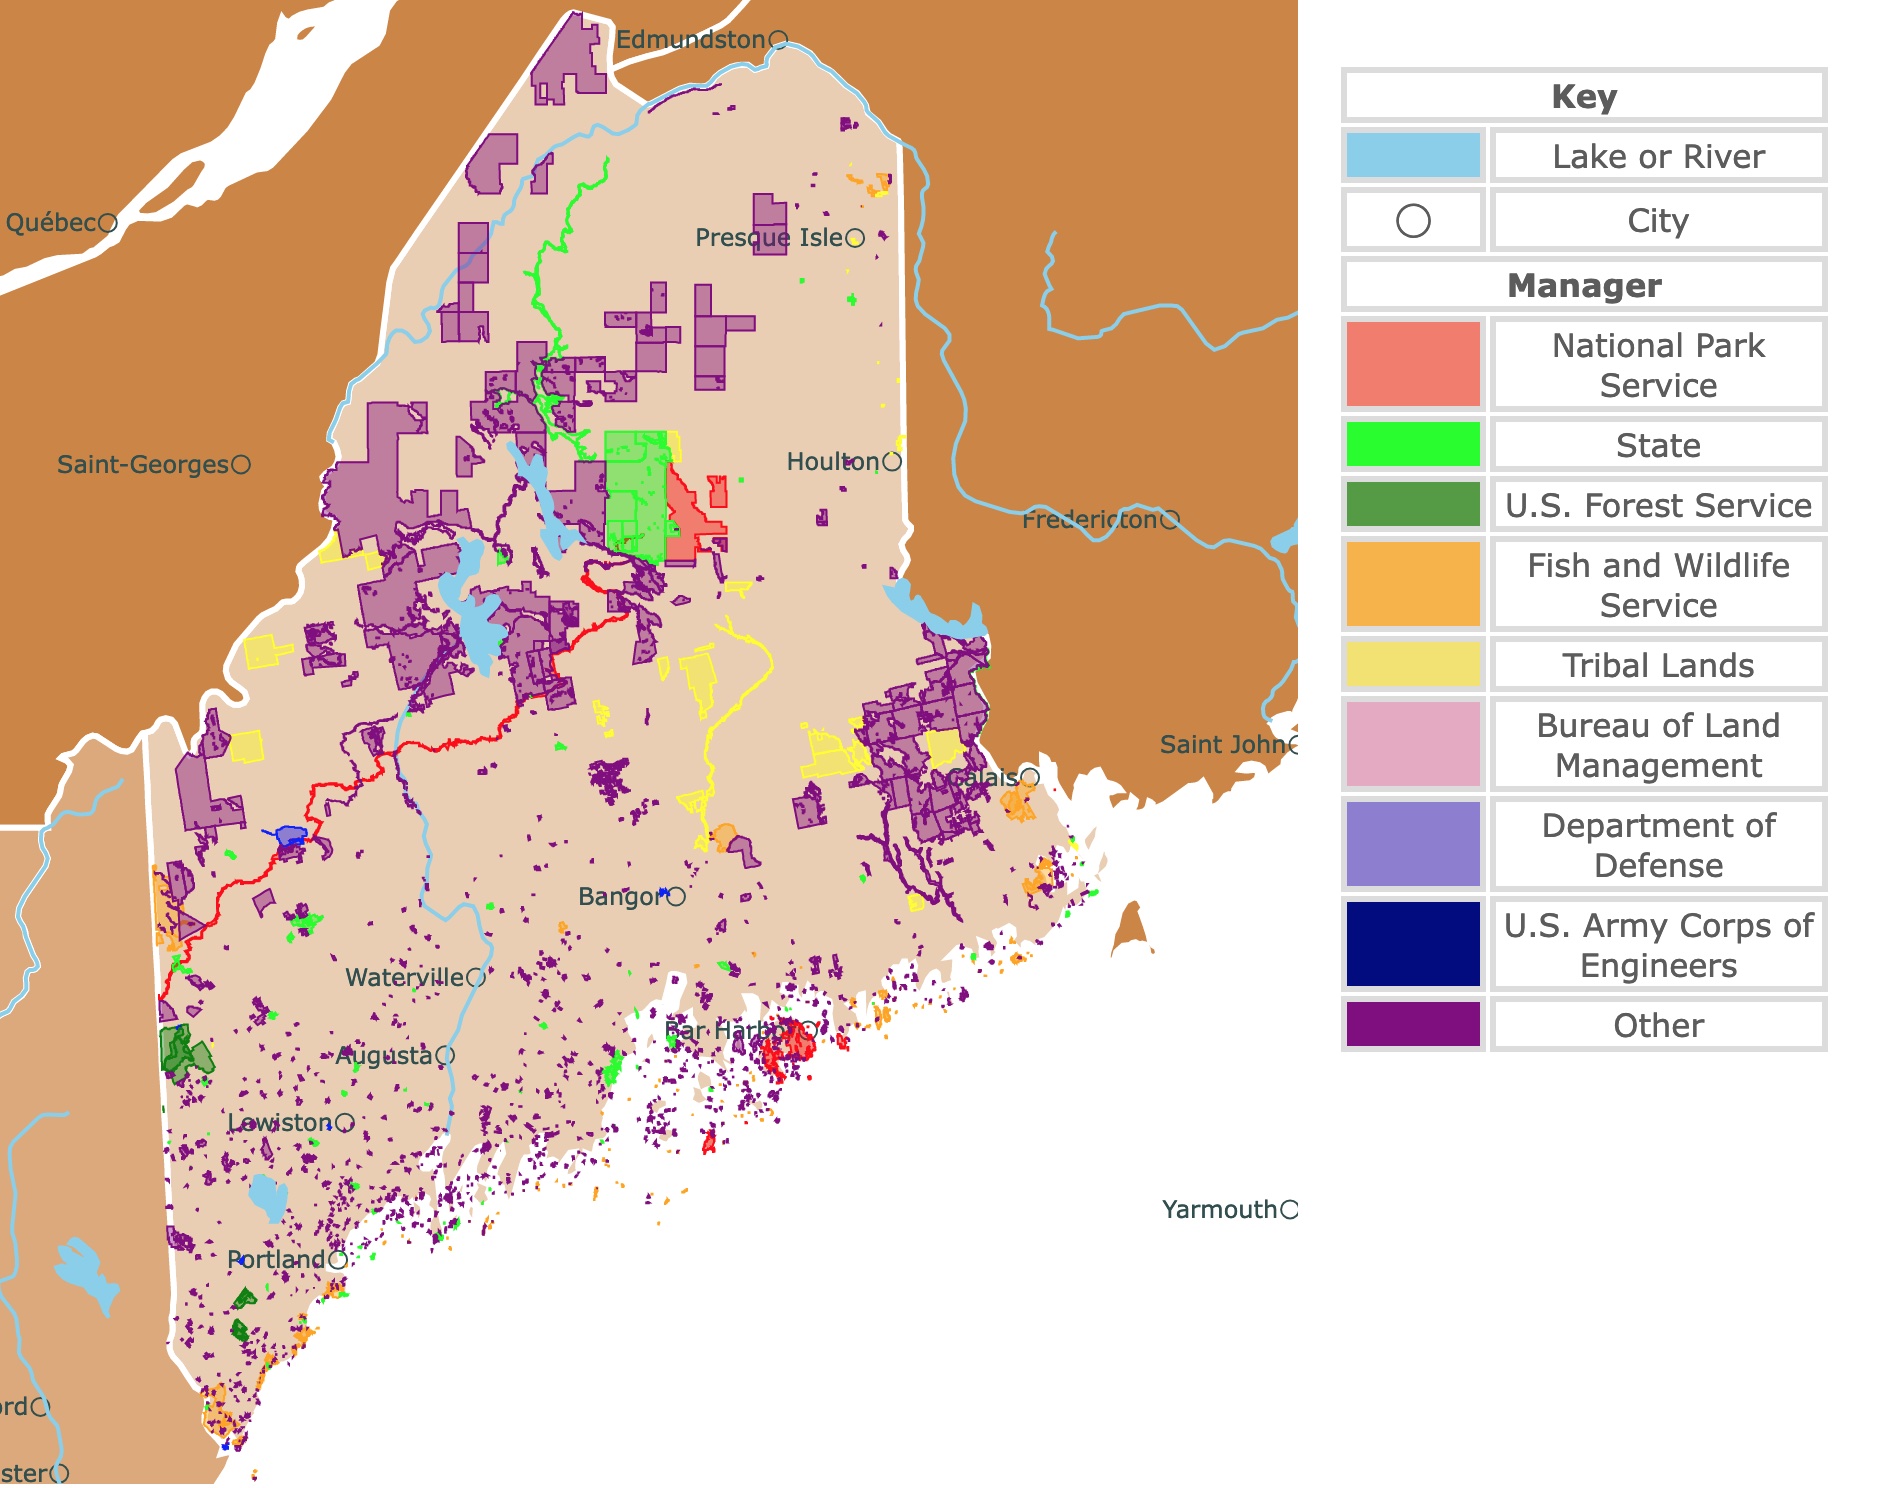 Map of Maine's state parks, national parks, forests, and public lands areas